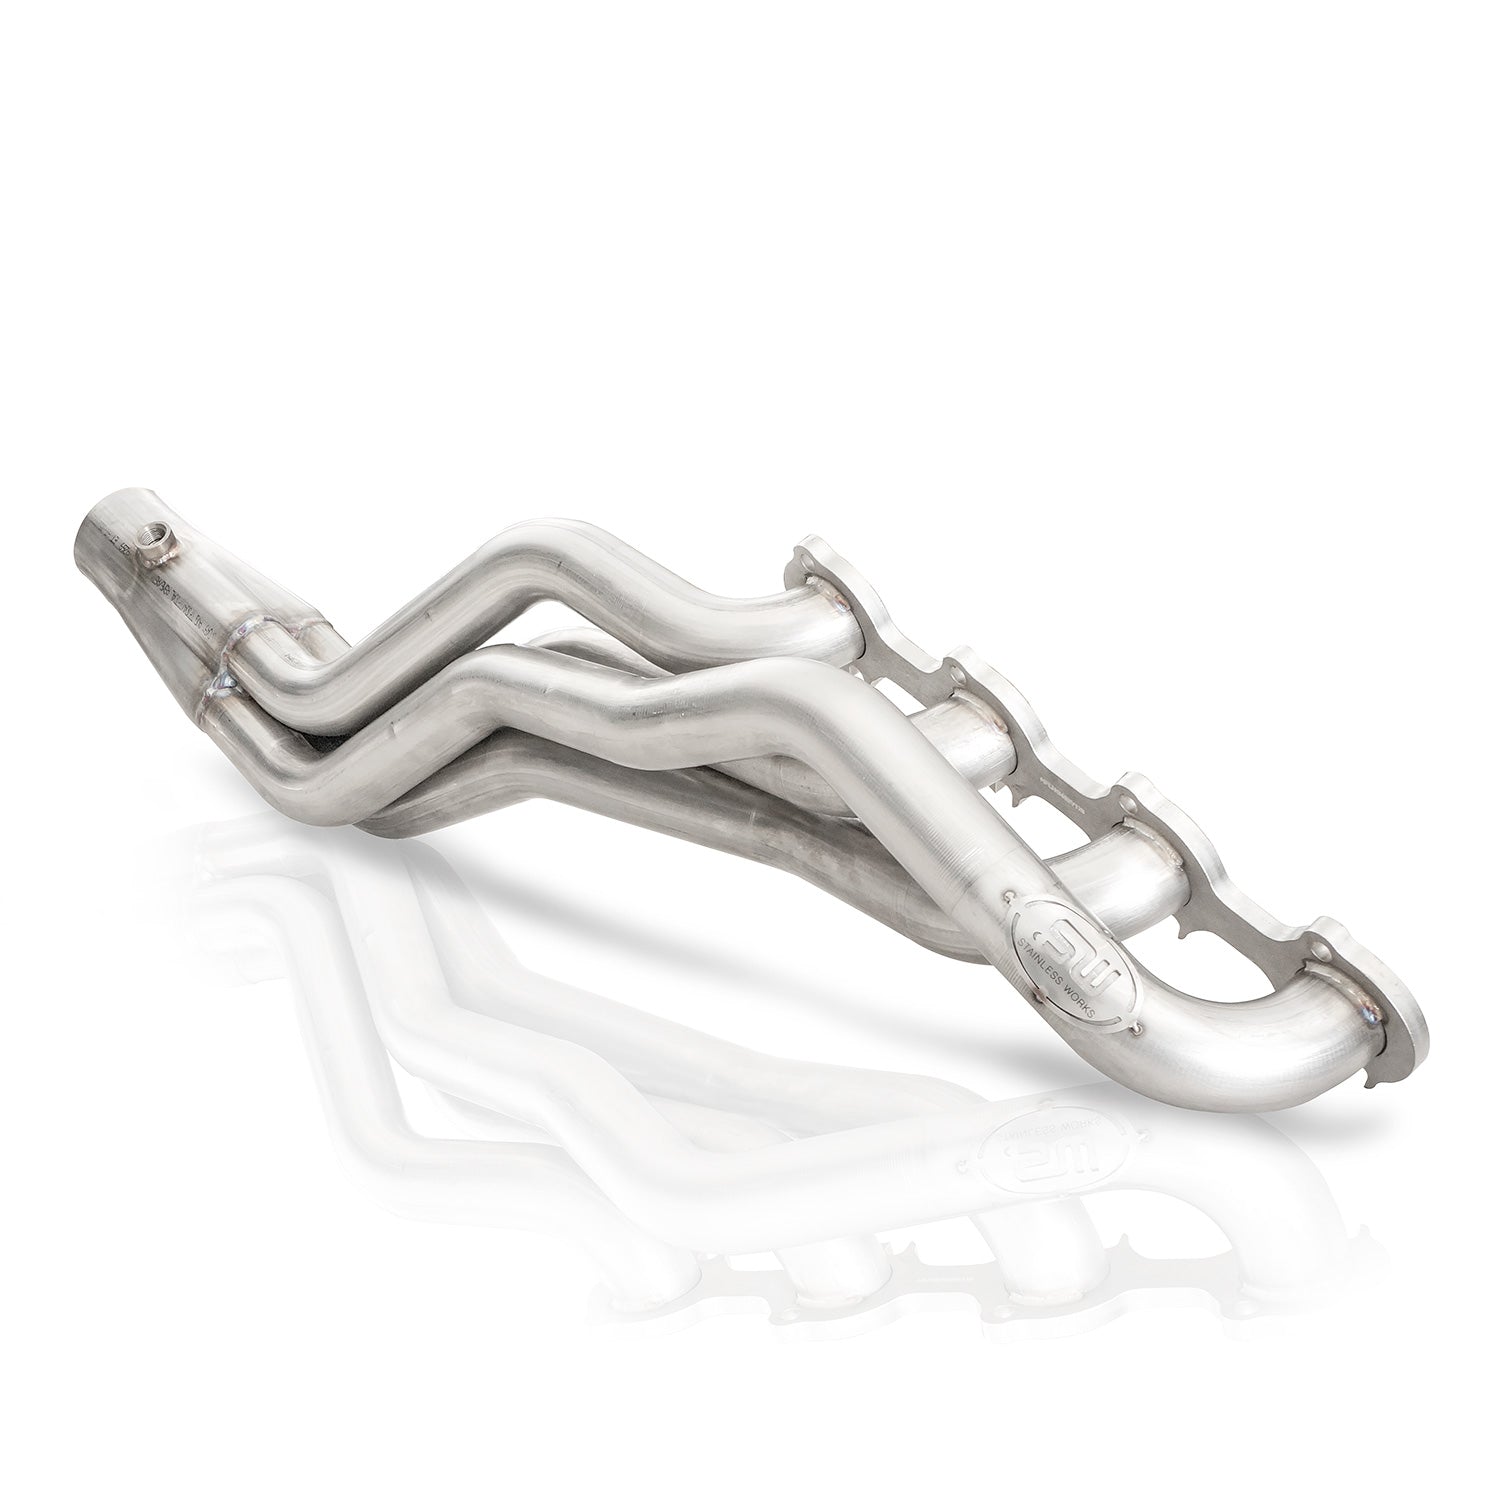 stainless-works-headers-1-3-4-with-catted-leads-performance-connect-3-4